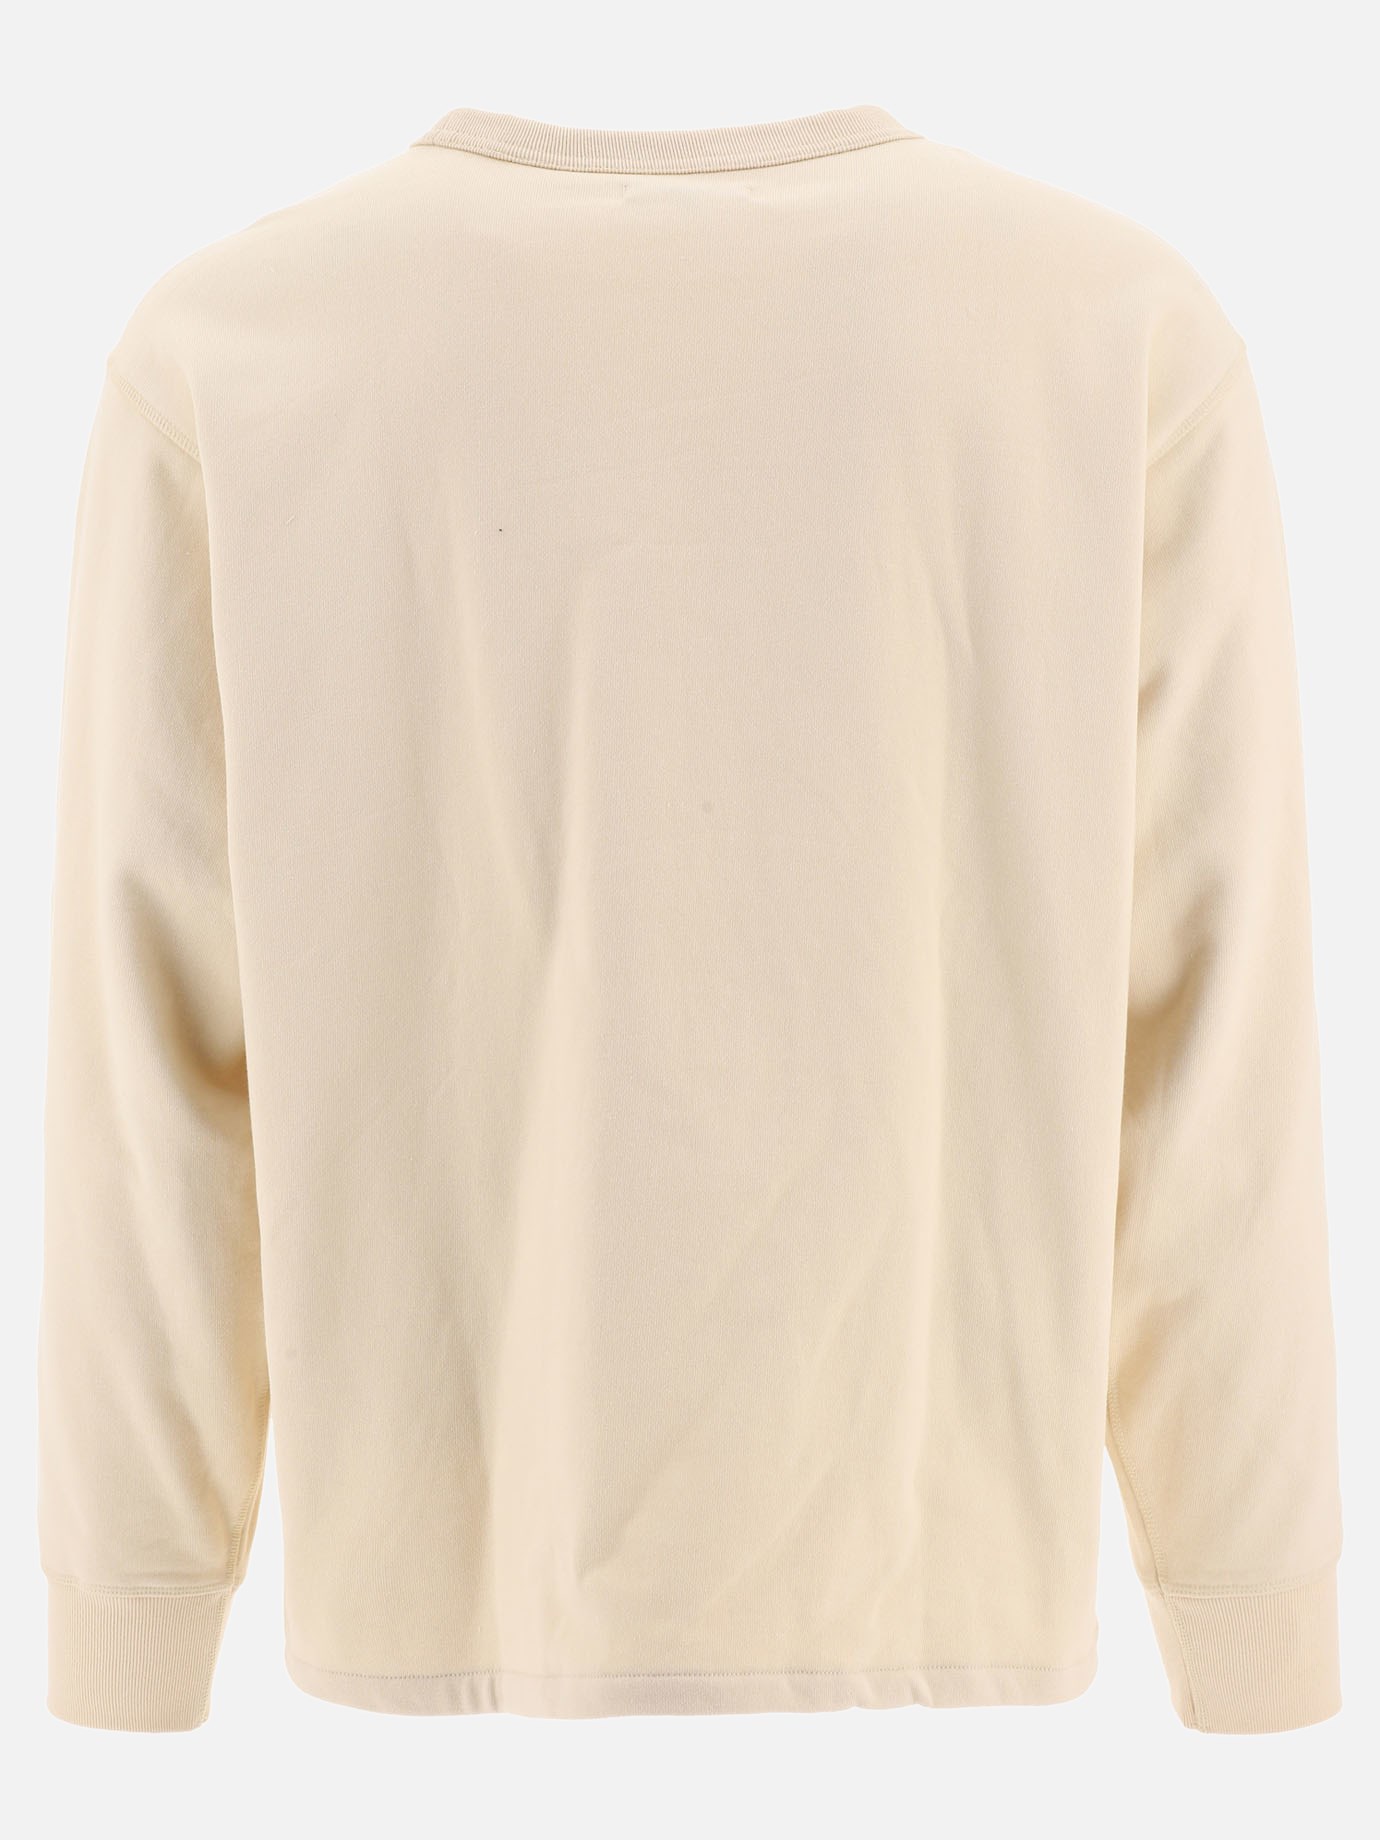  Classic  sweatshirt by Levi's Made & Crafted